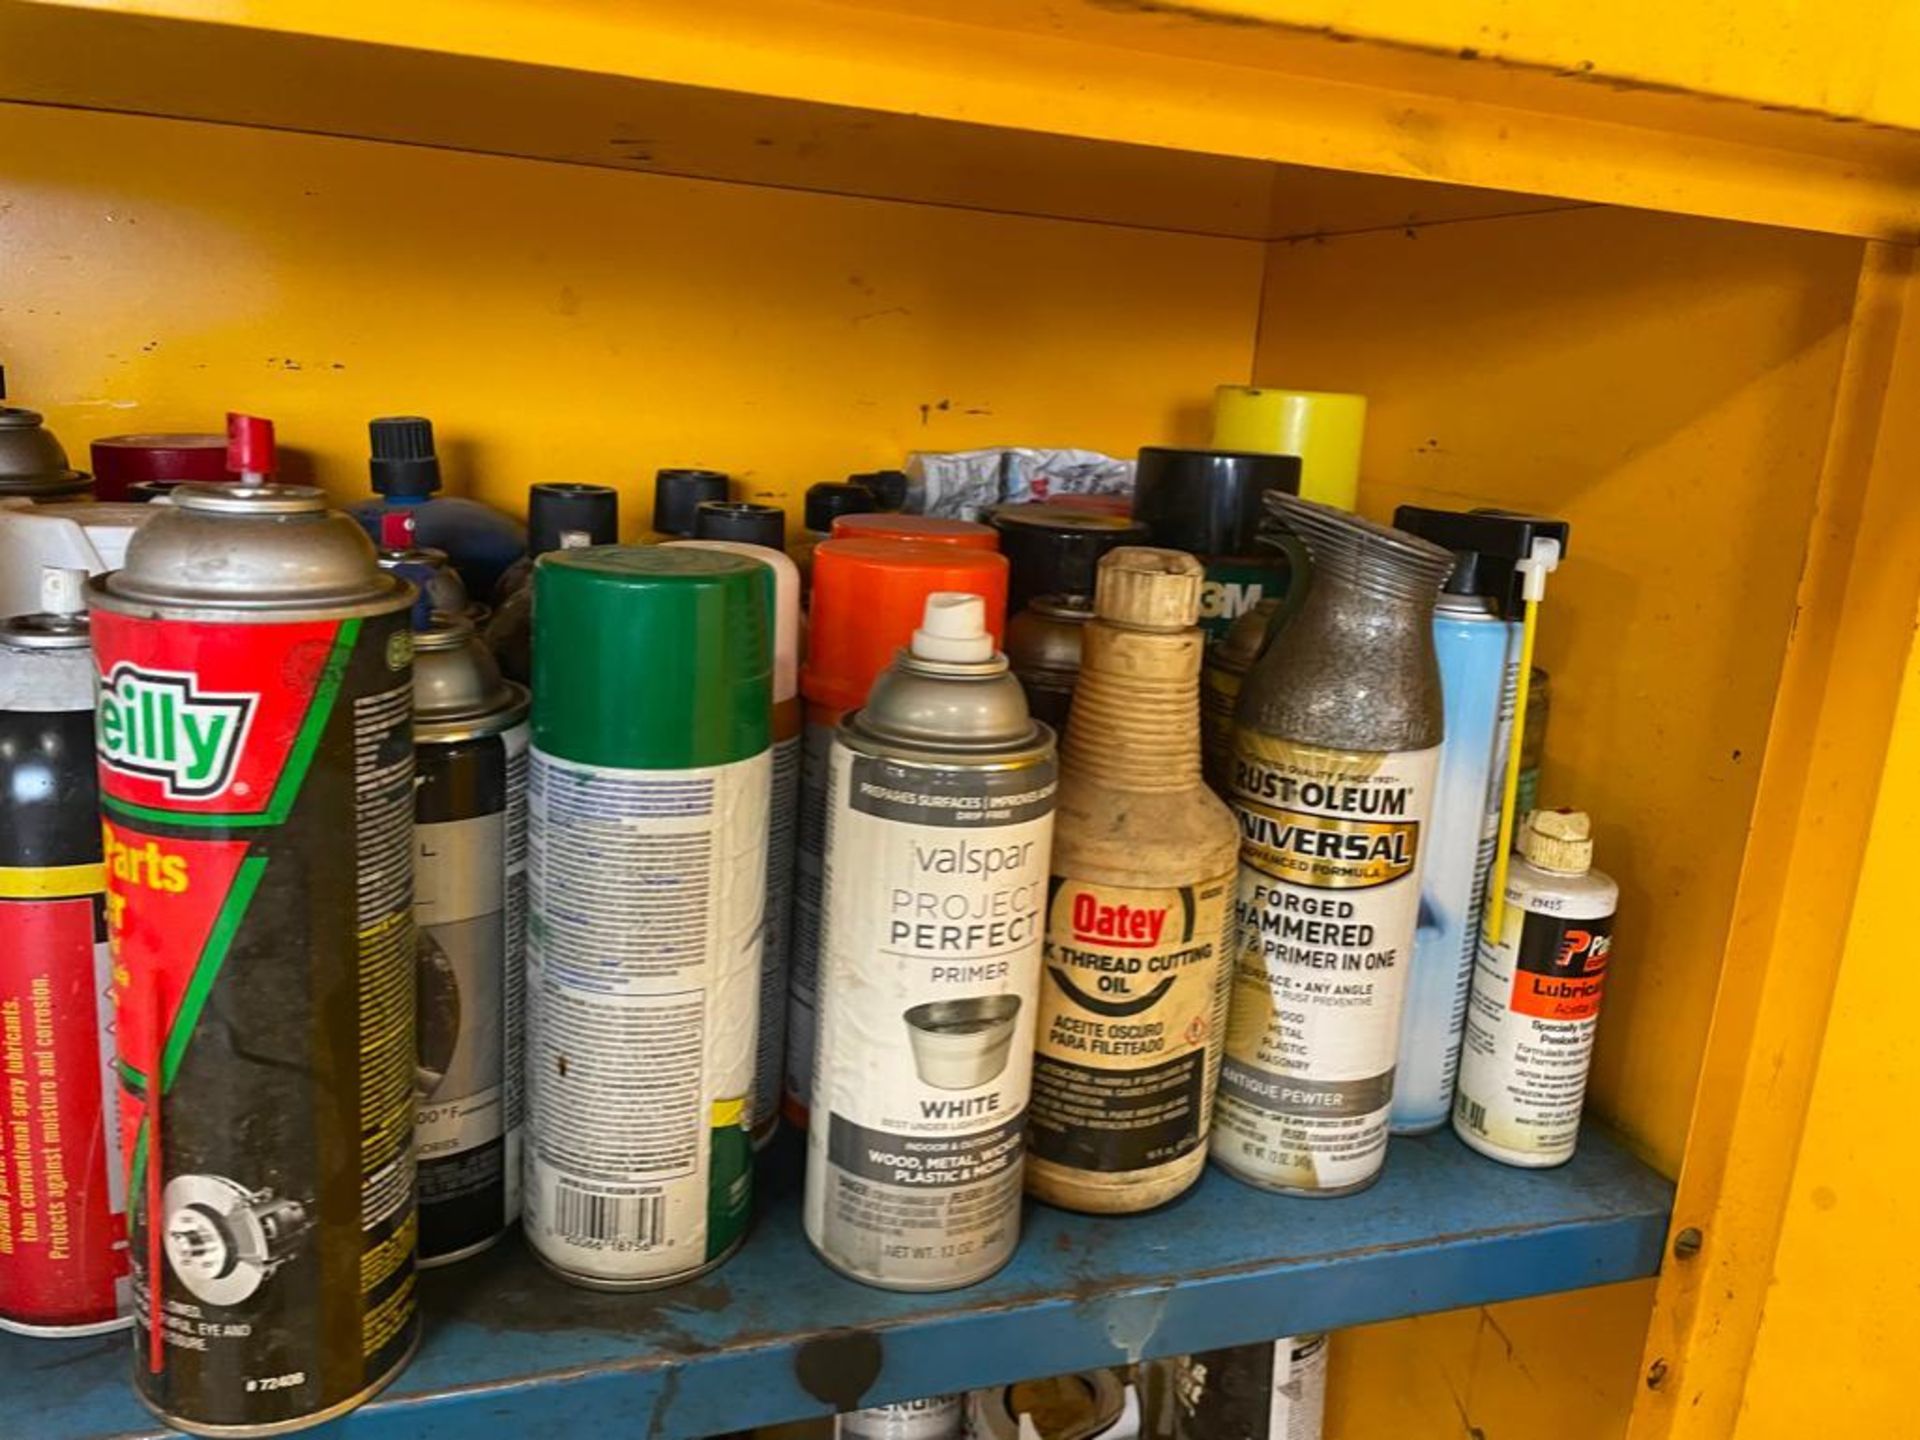 Miscellaneous Paint Supplies, Oils, Lubricants, Etc. Located in Hazelwood, MO - Image 4 of 7